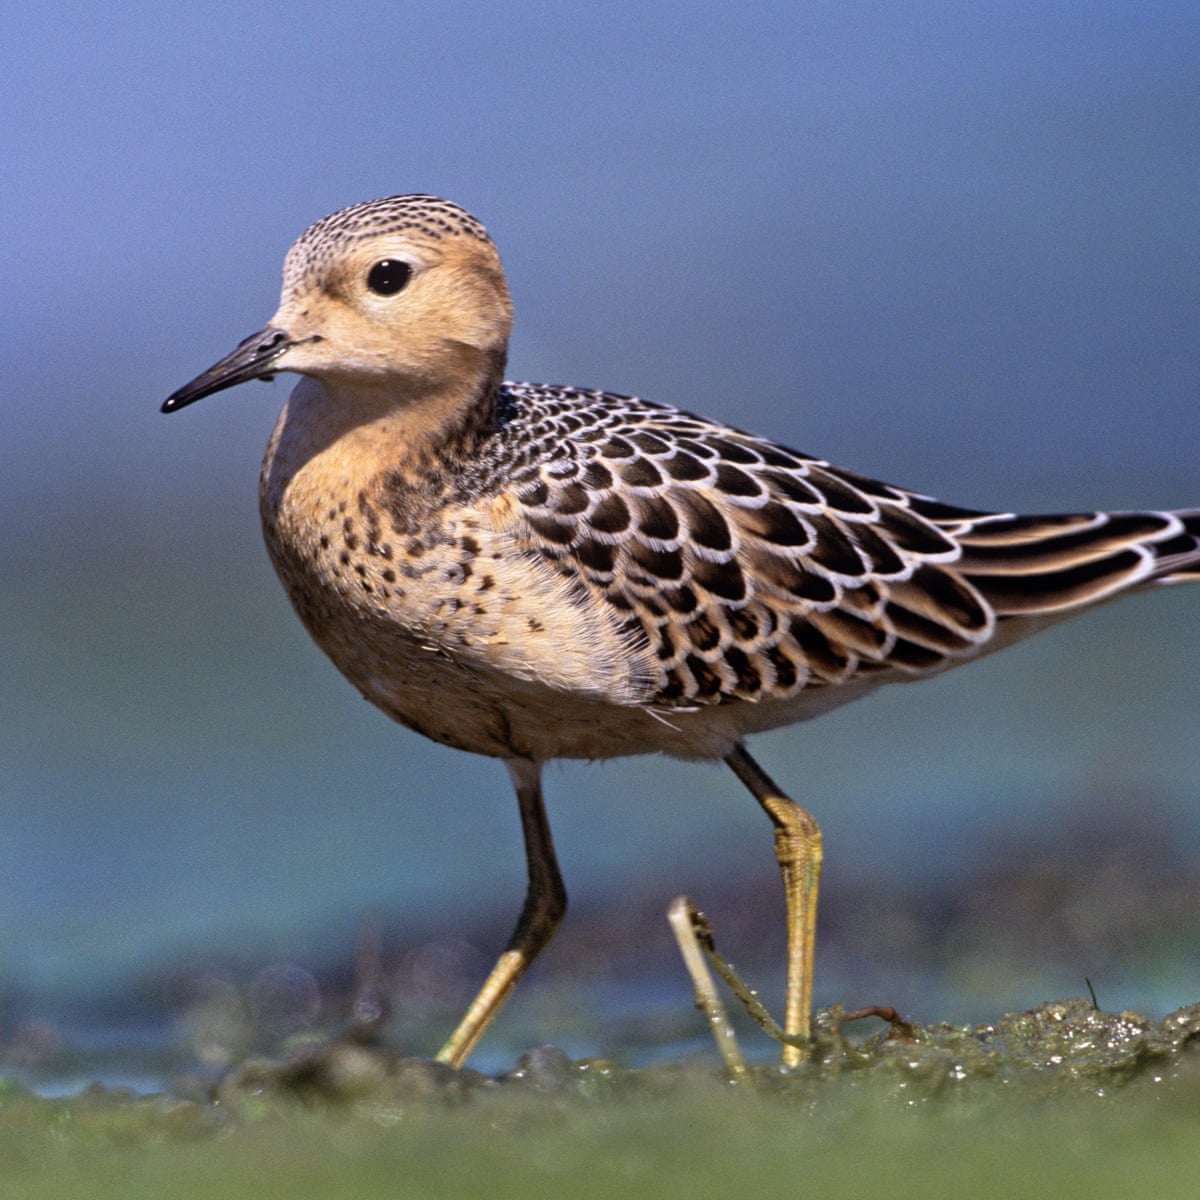 Inminente Personal Estructuralmente Birdwatch: On the trail of the elusive buff-breasted sandpiper, man and boy  | Birds | The Guardian